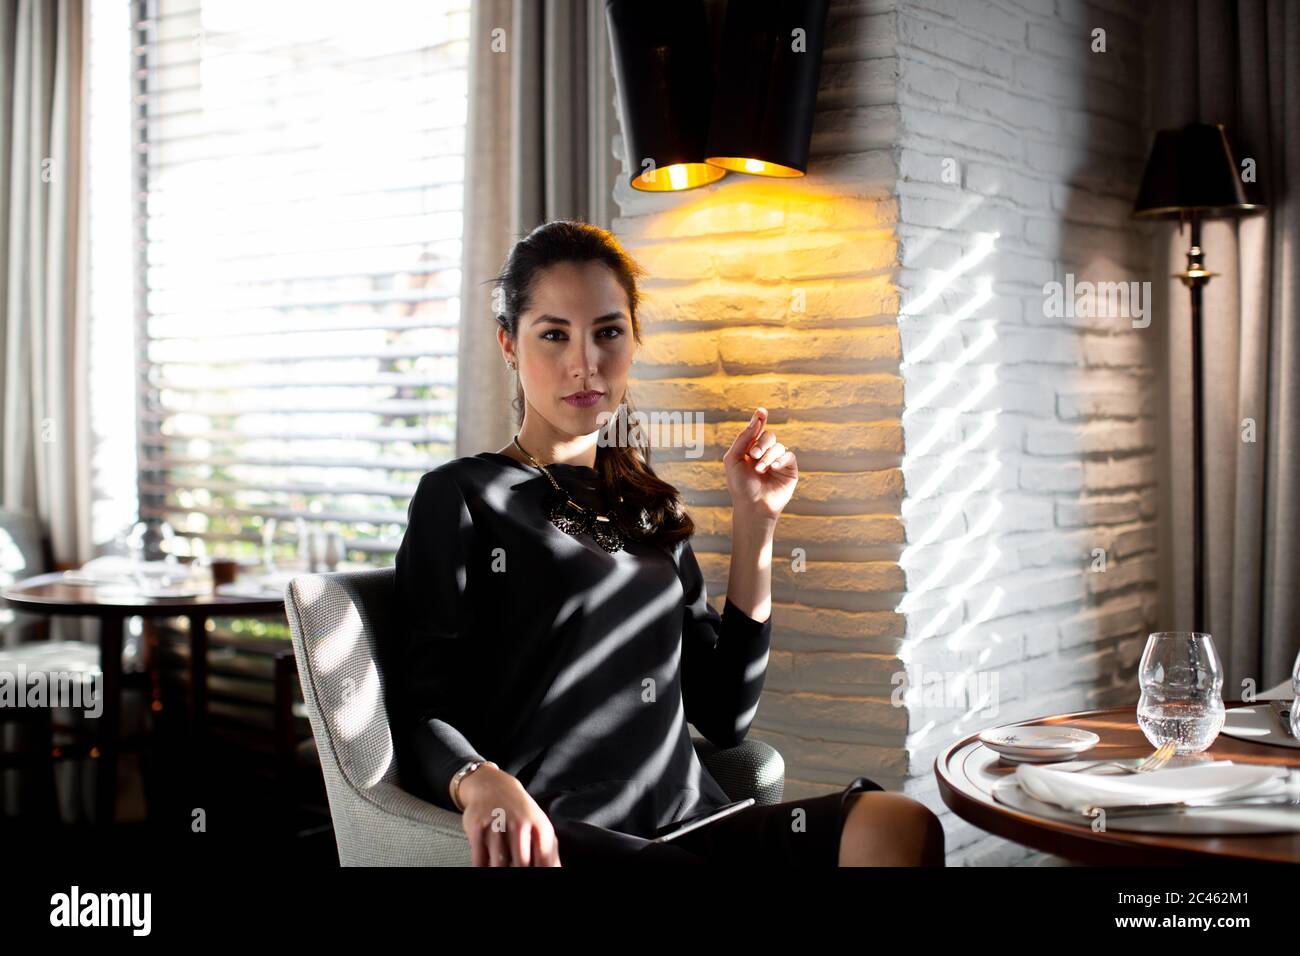 Portrait of sophisticated young woman in boutique hotel restaurant, Italy Stock Photo